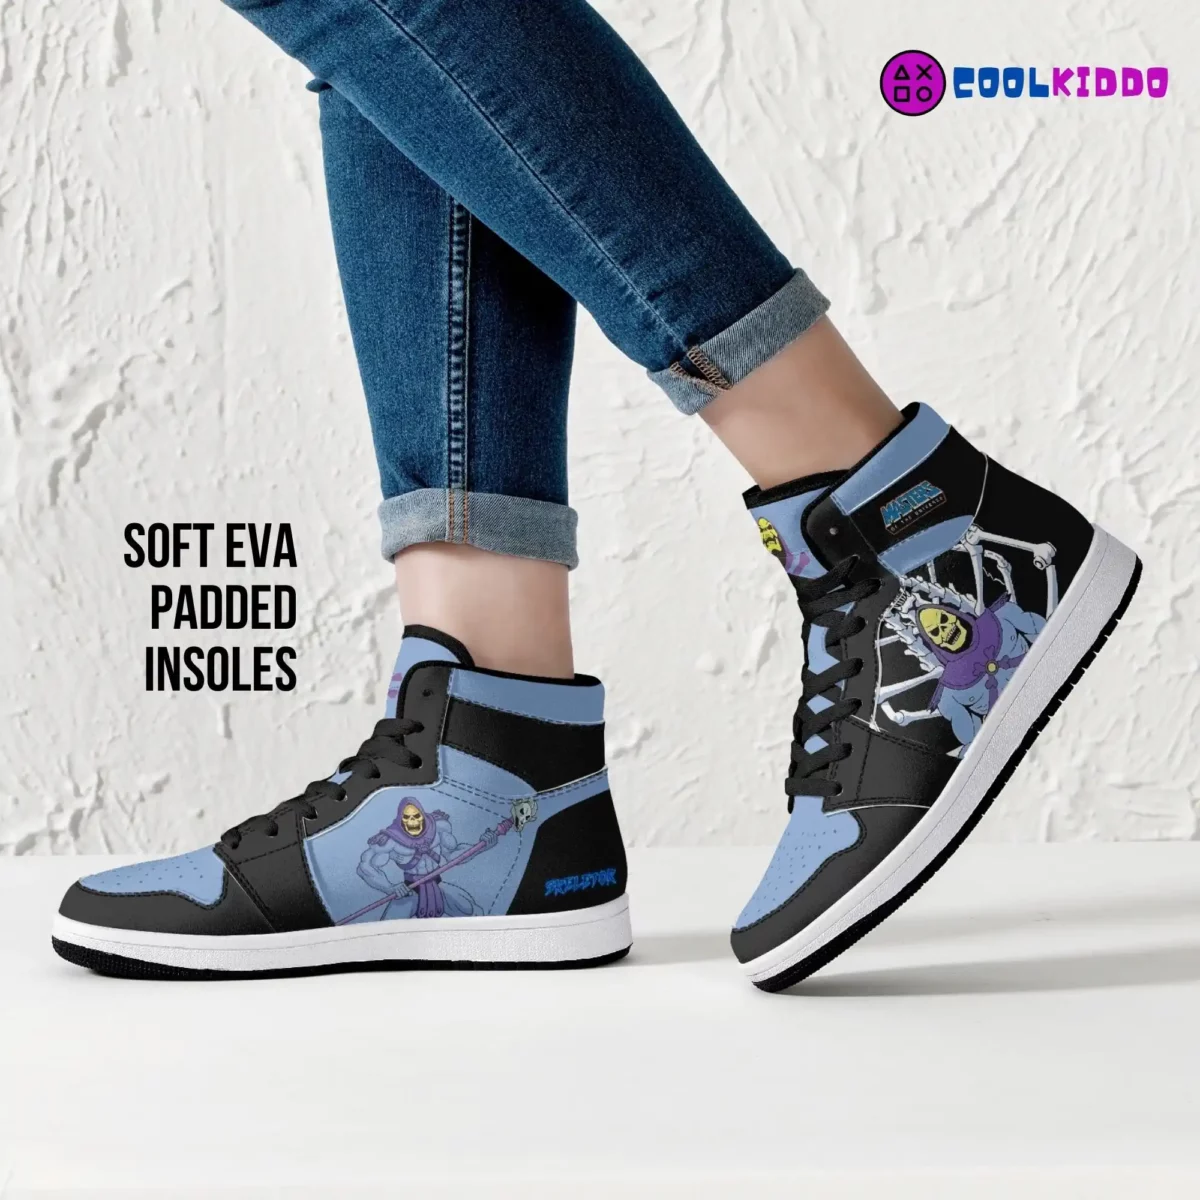 Custom Skeletor Masters of the Universe High-Top Adult/Youth Casual Sneakers Cool Kiddo 16